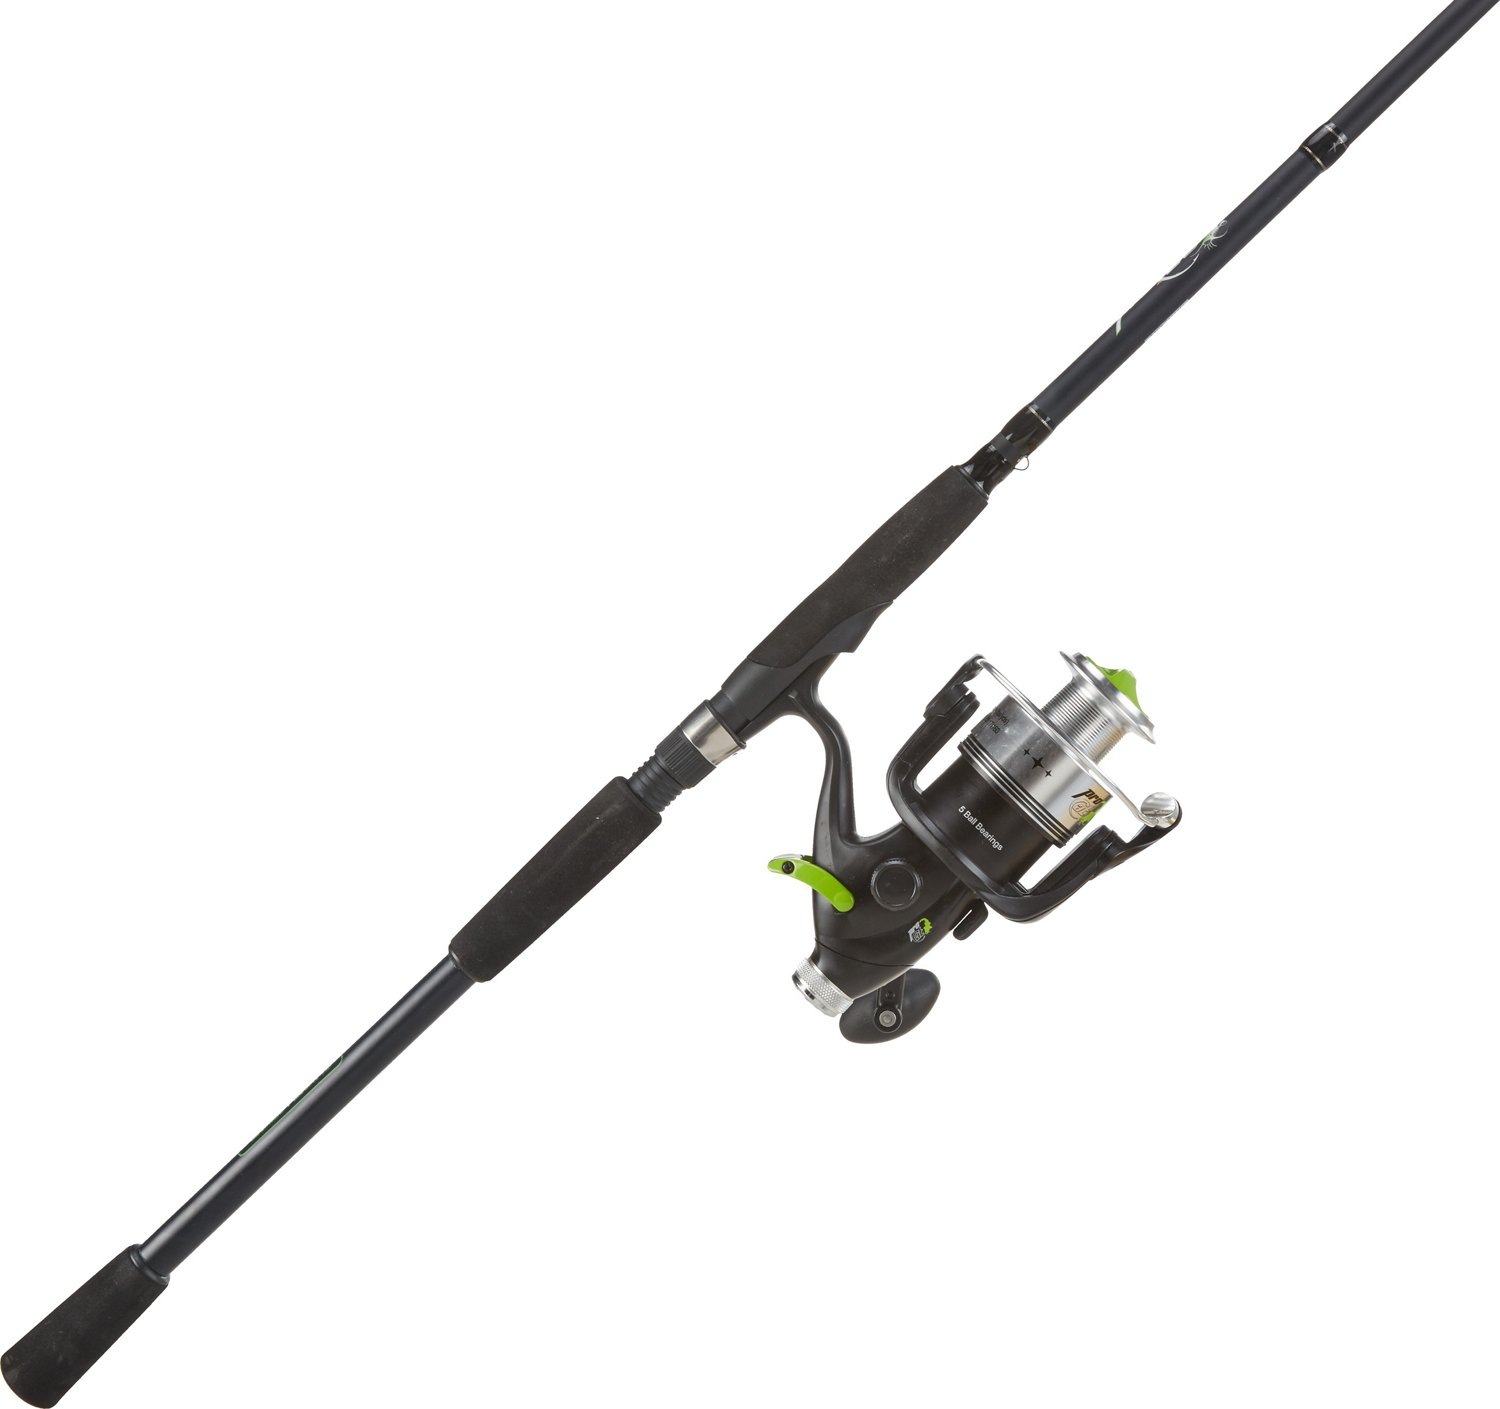 pro cat fishing rod - Online Exclusive Rate- OFF 73%